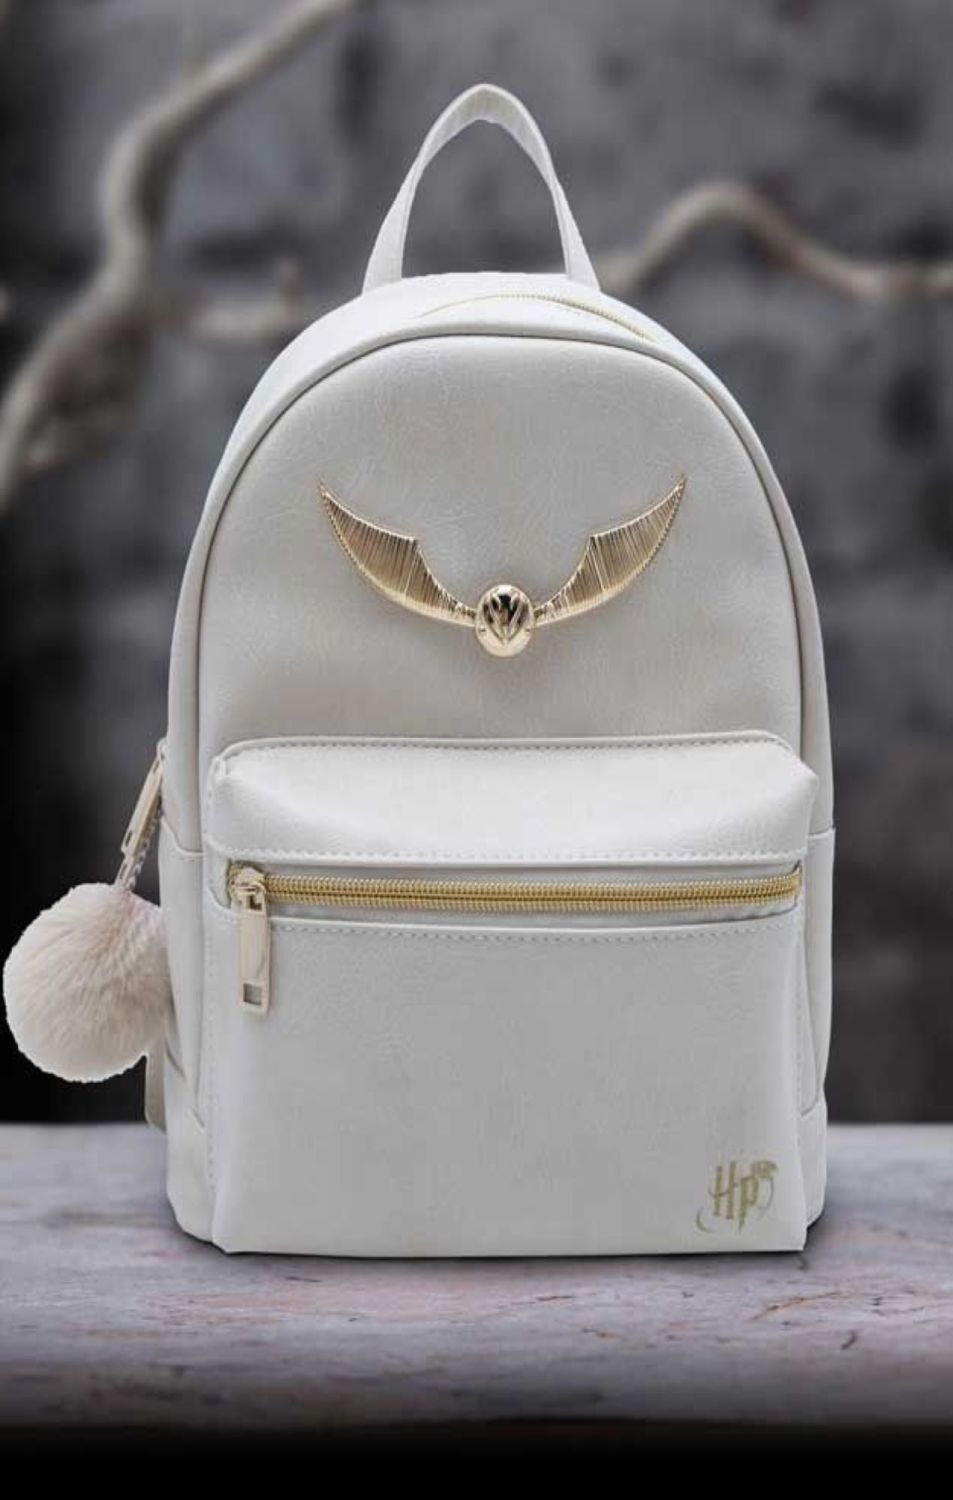 Official Harry Potter Golden Snitch backpack RRP £44.99